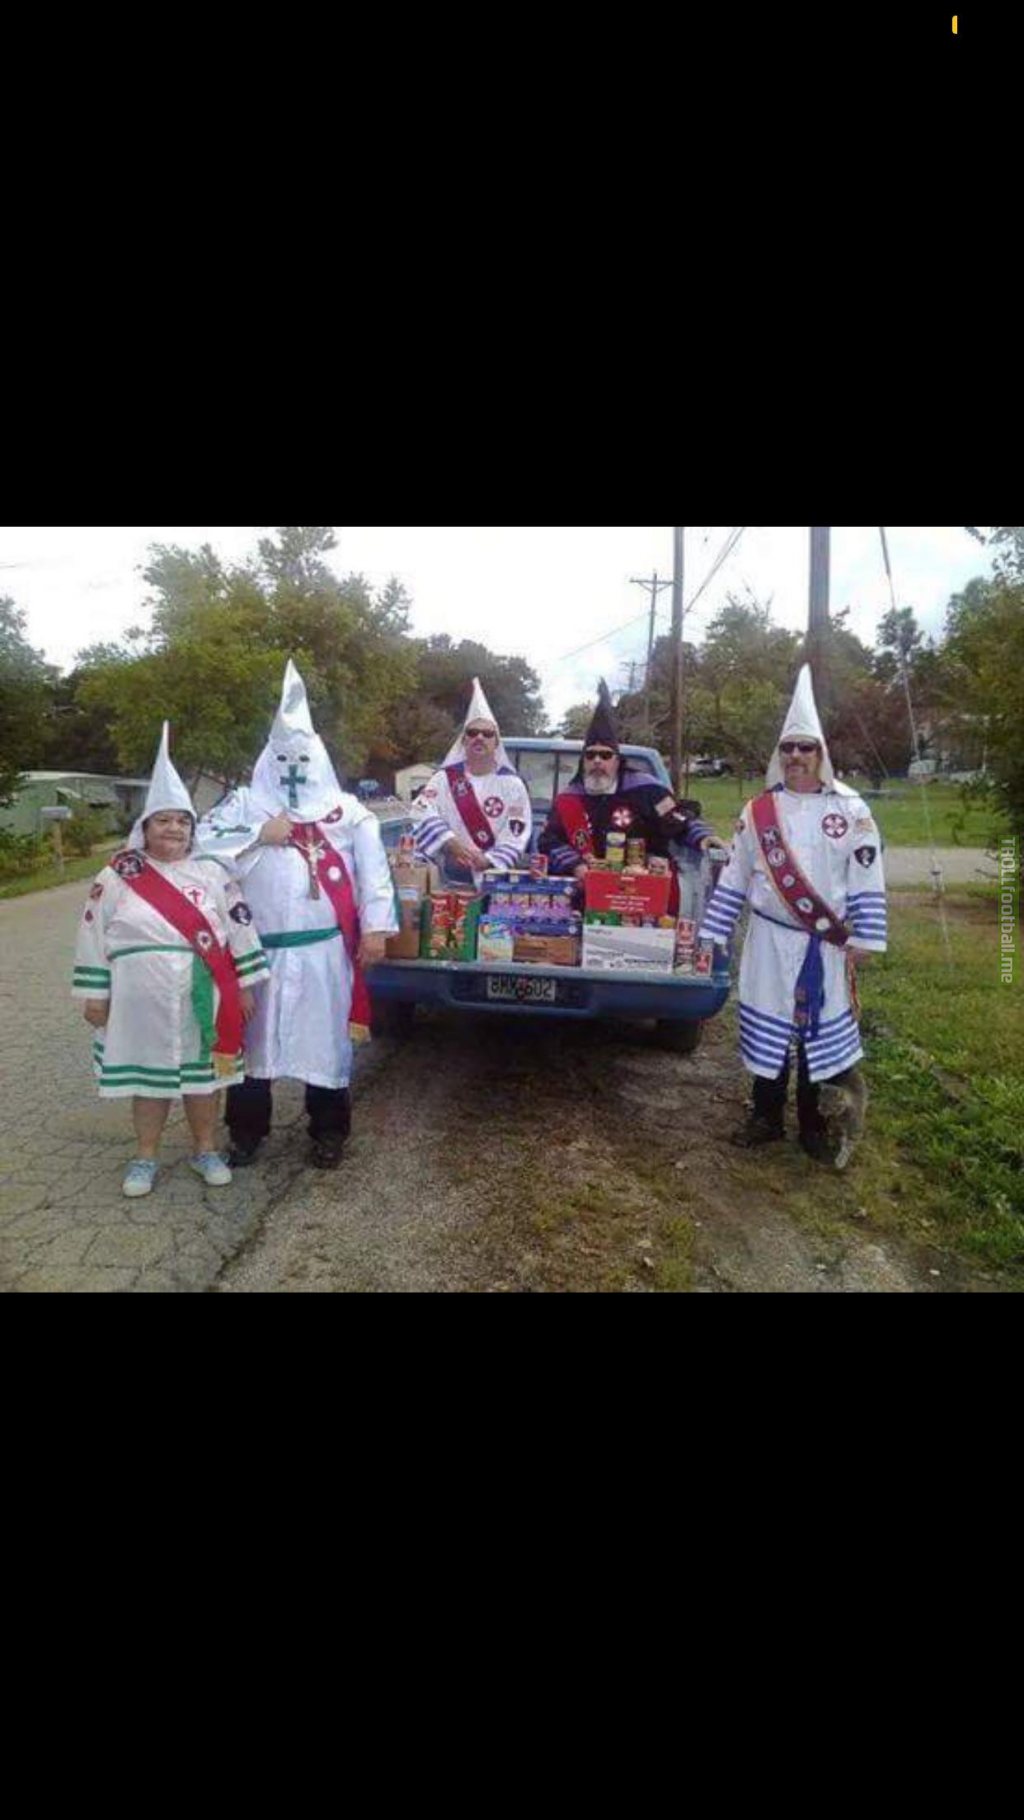 Me and the lads going to Stamford bridge the other week